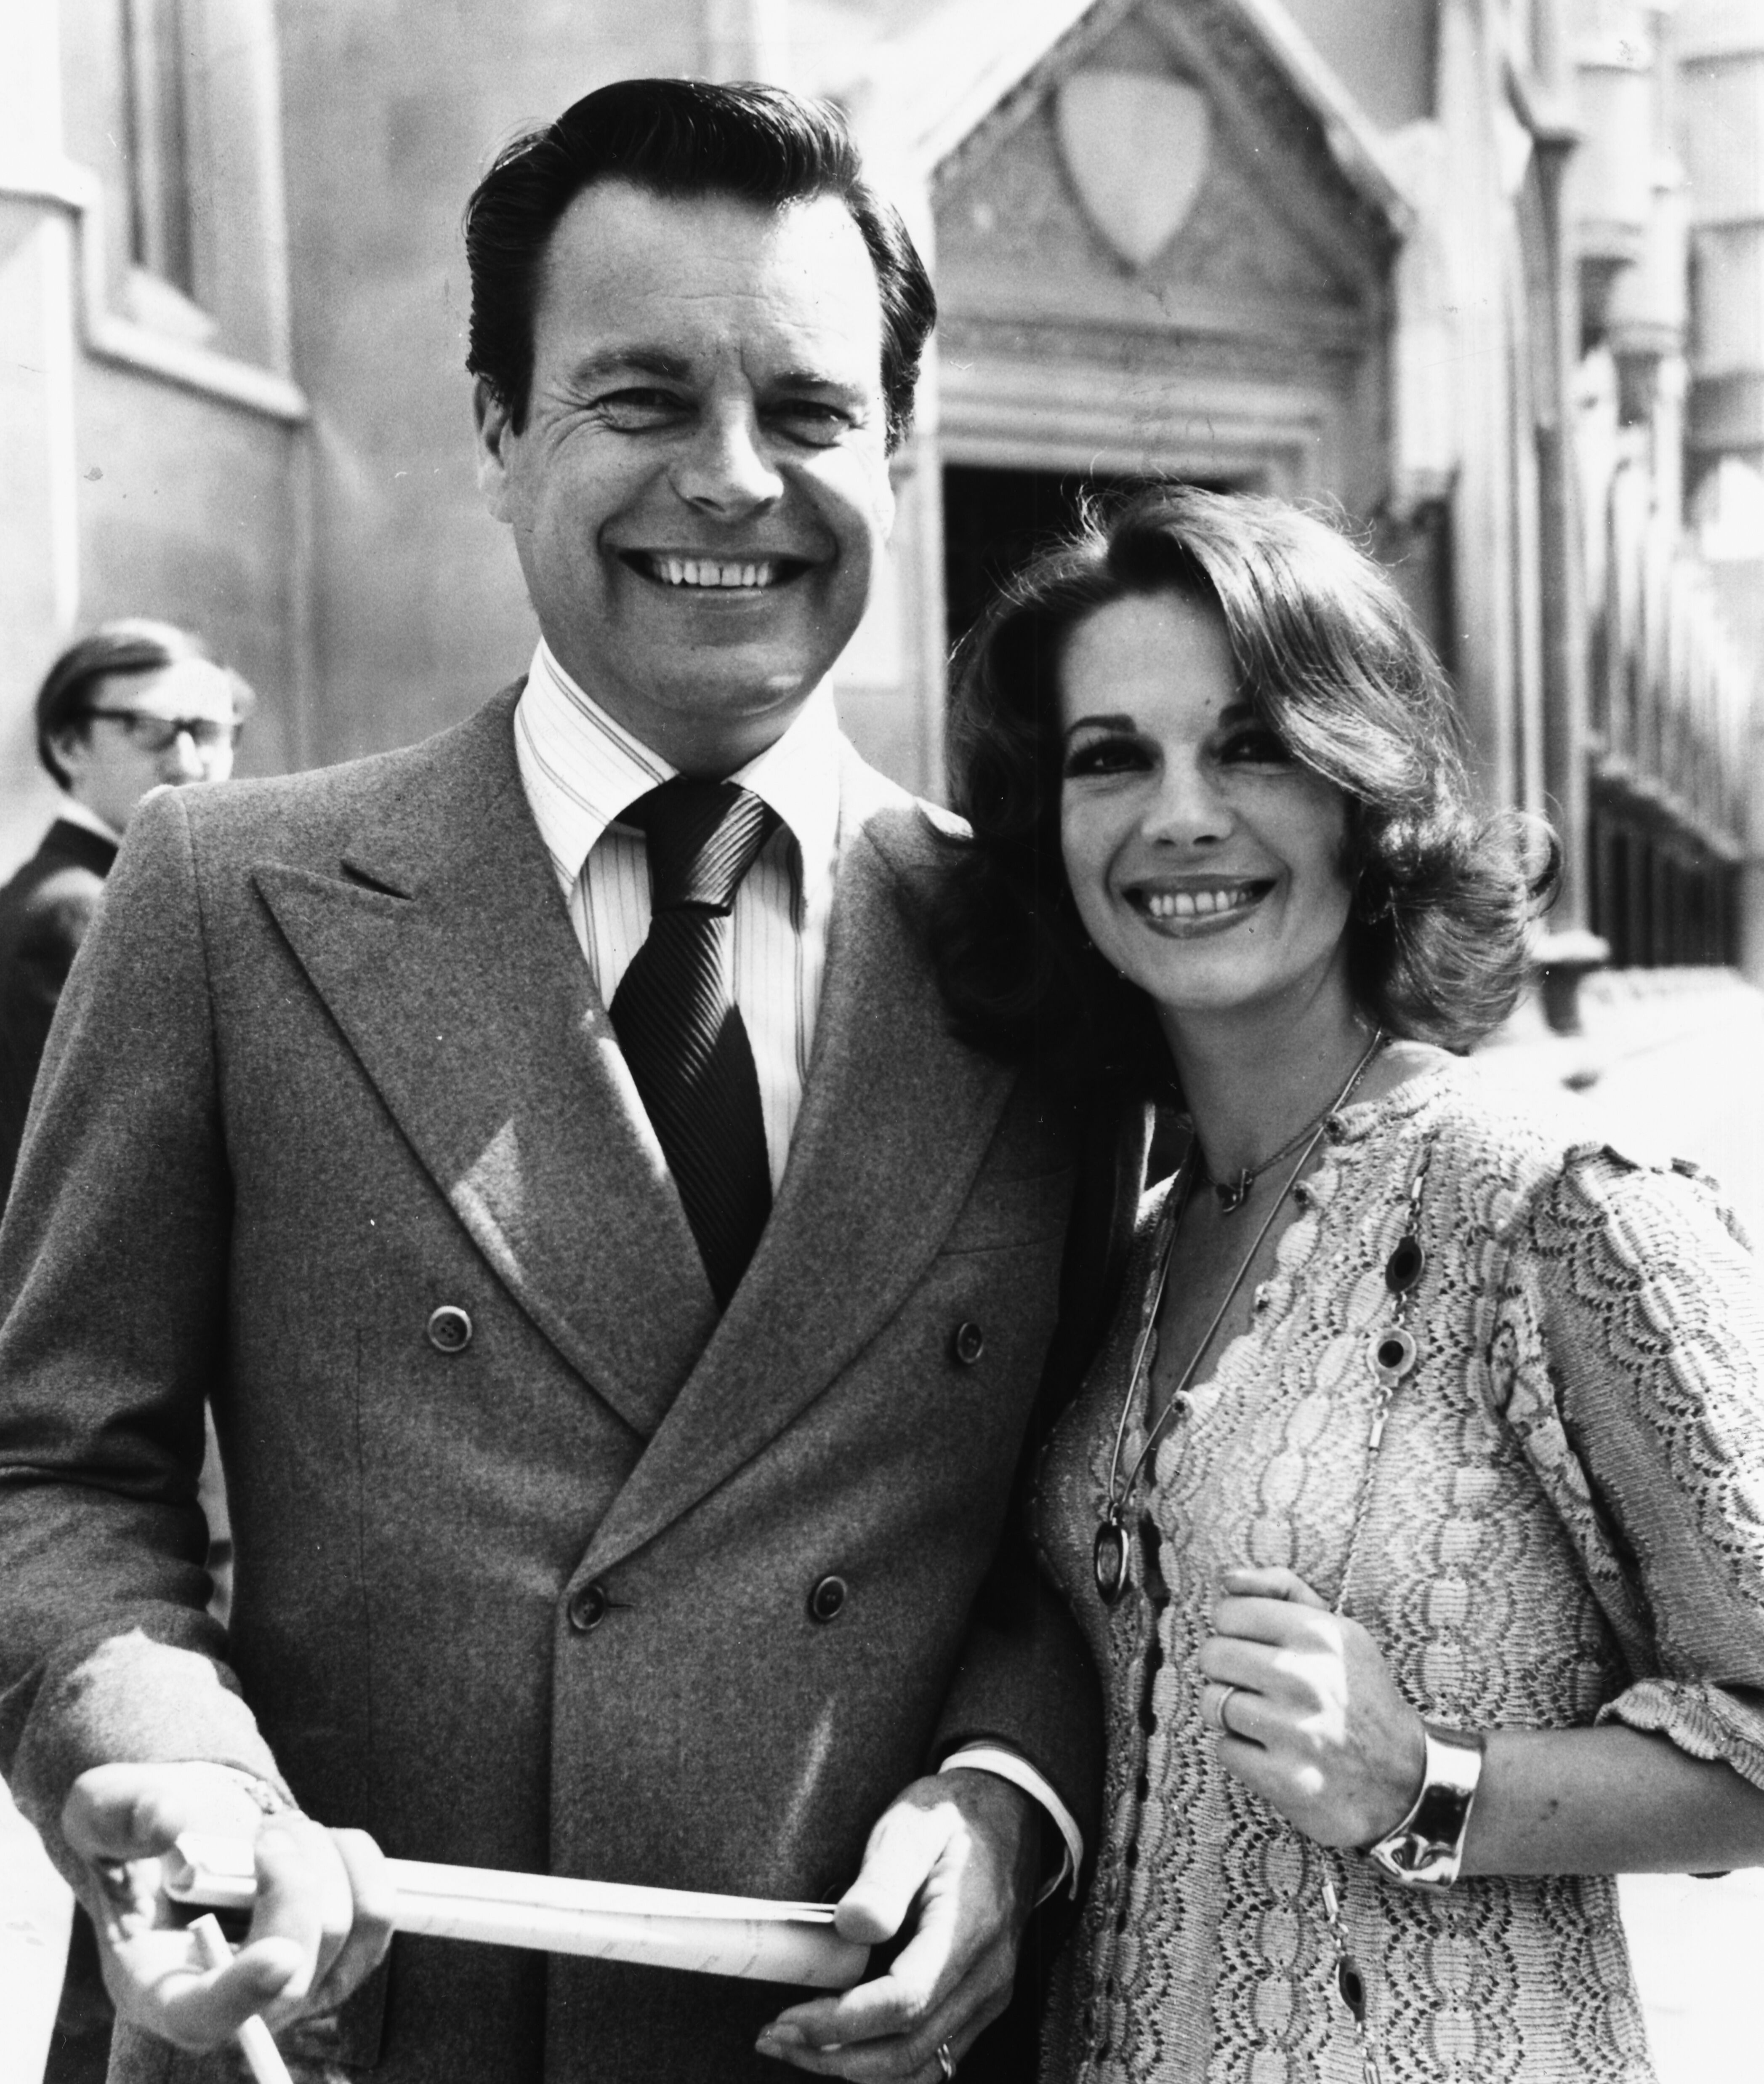 Natalie Wood and Robert Wagner in London, July 1st 1976. | Source: Getty Images